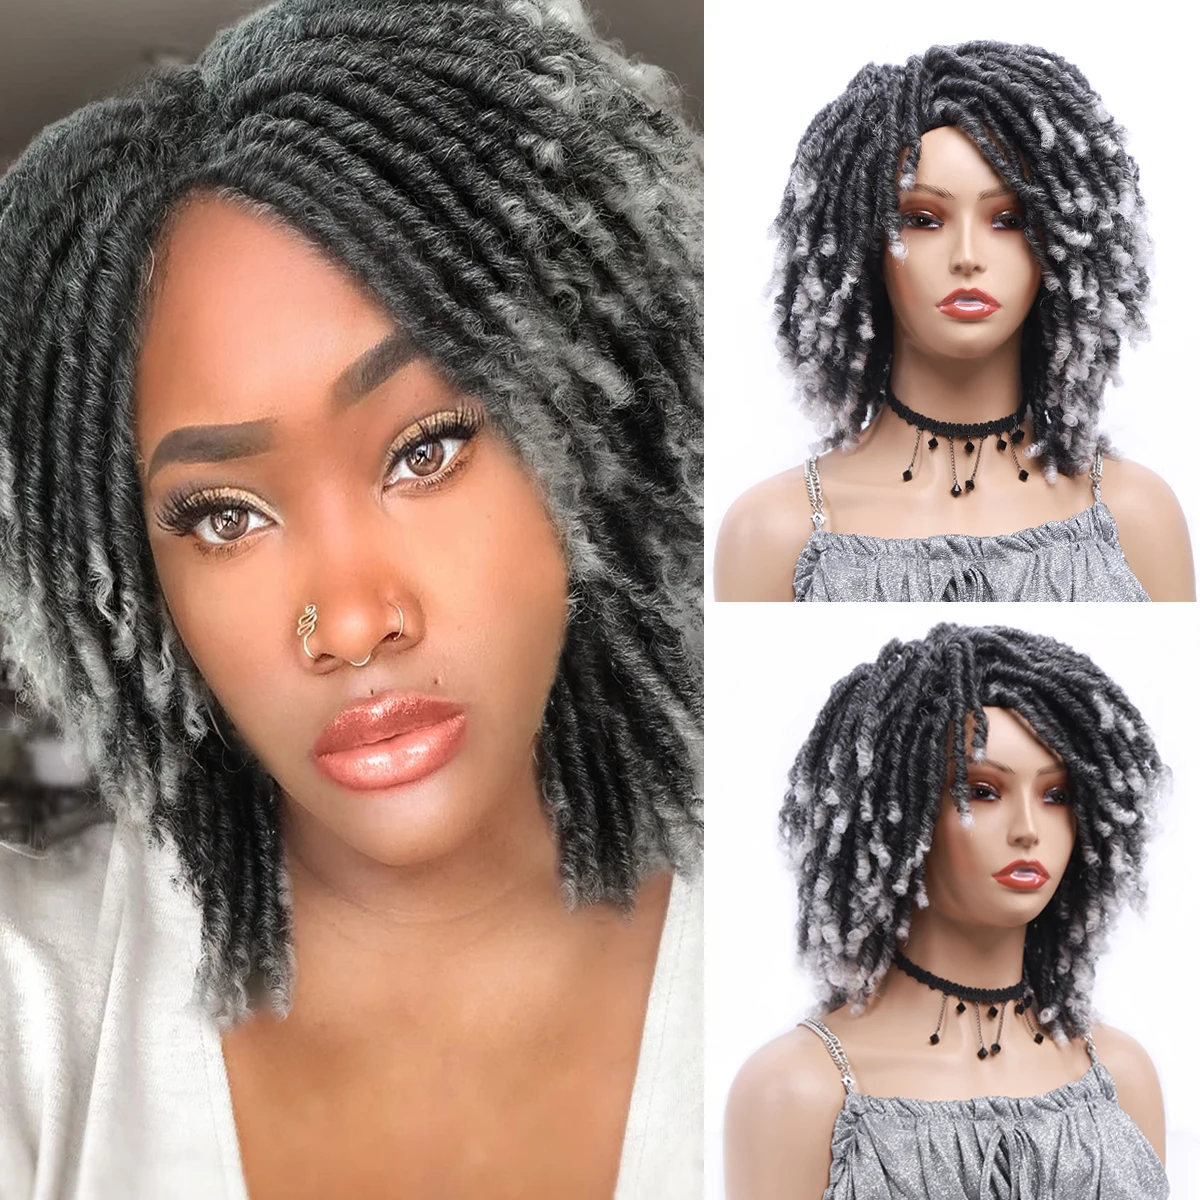 Soft Dreadlocs Wig Afro Short Braided Wigs Afro Bob Wig Synthetic DreadLock Wigs For Black Woman Short Curly Ends Cosplay